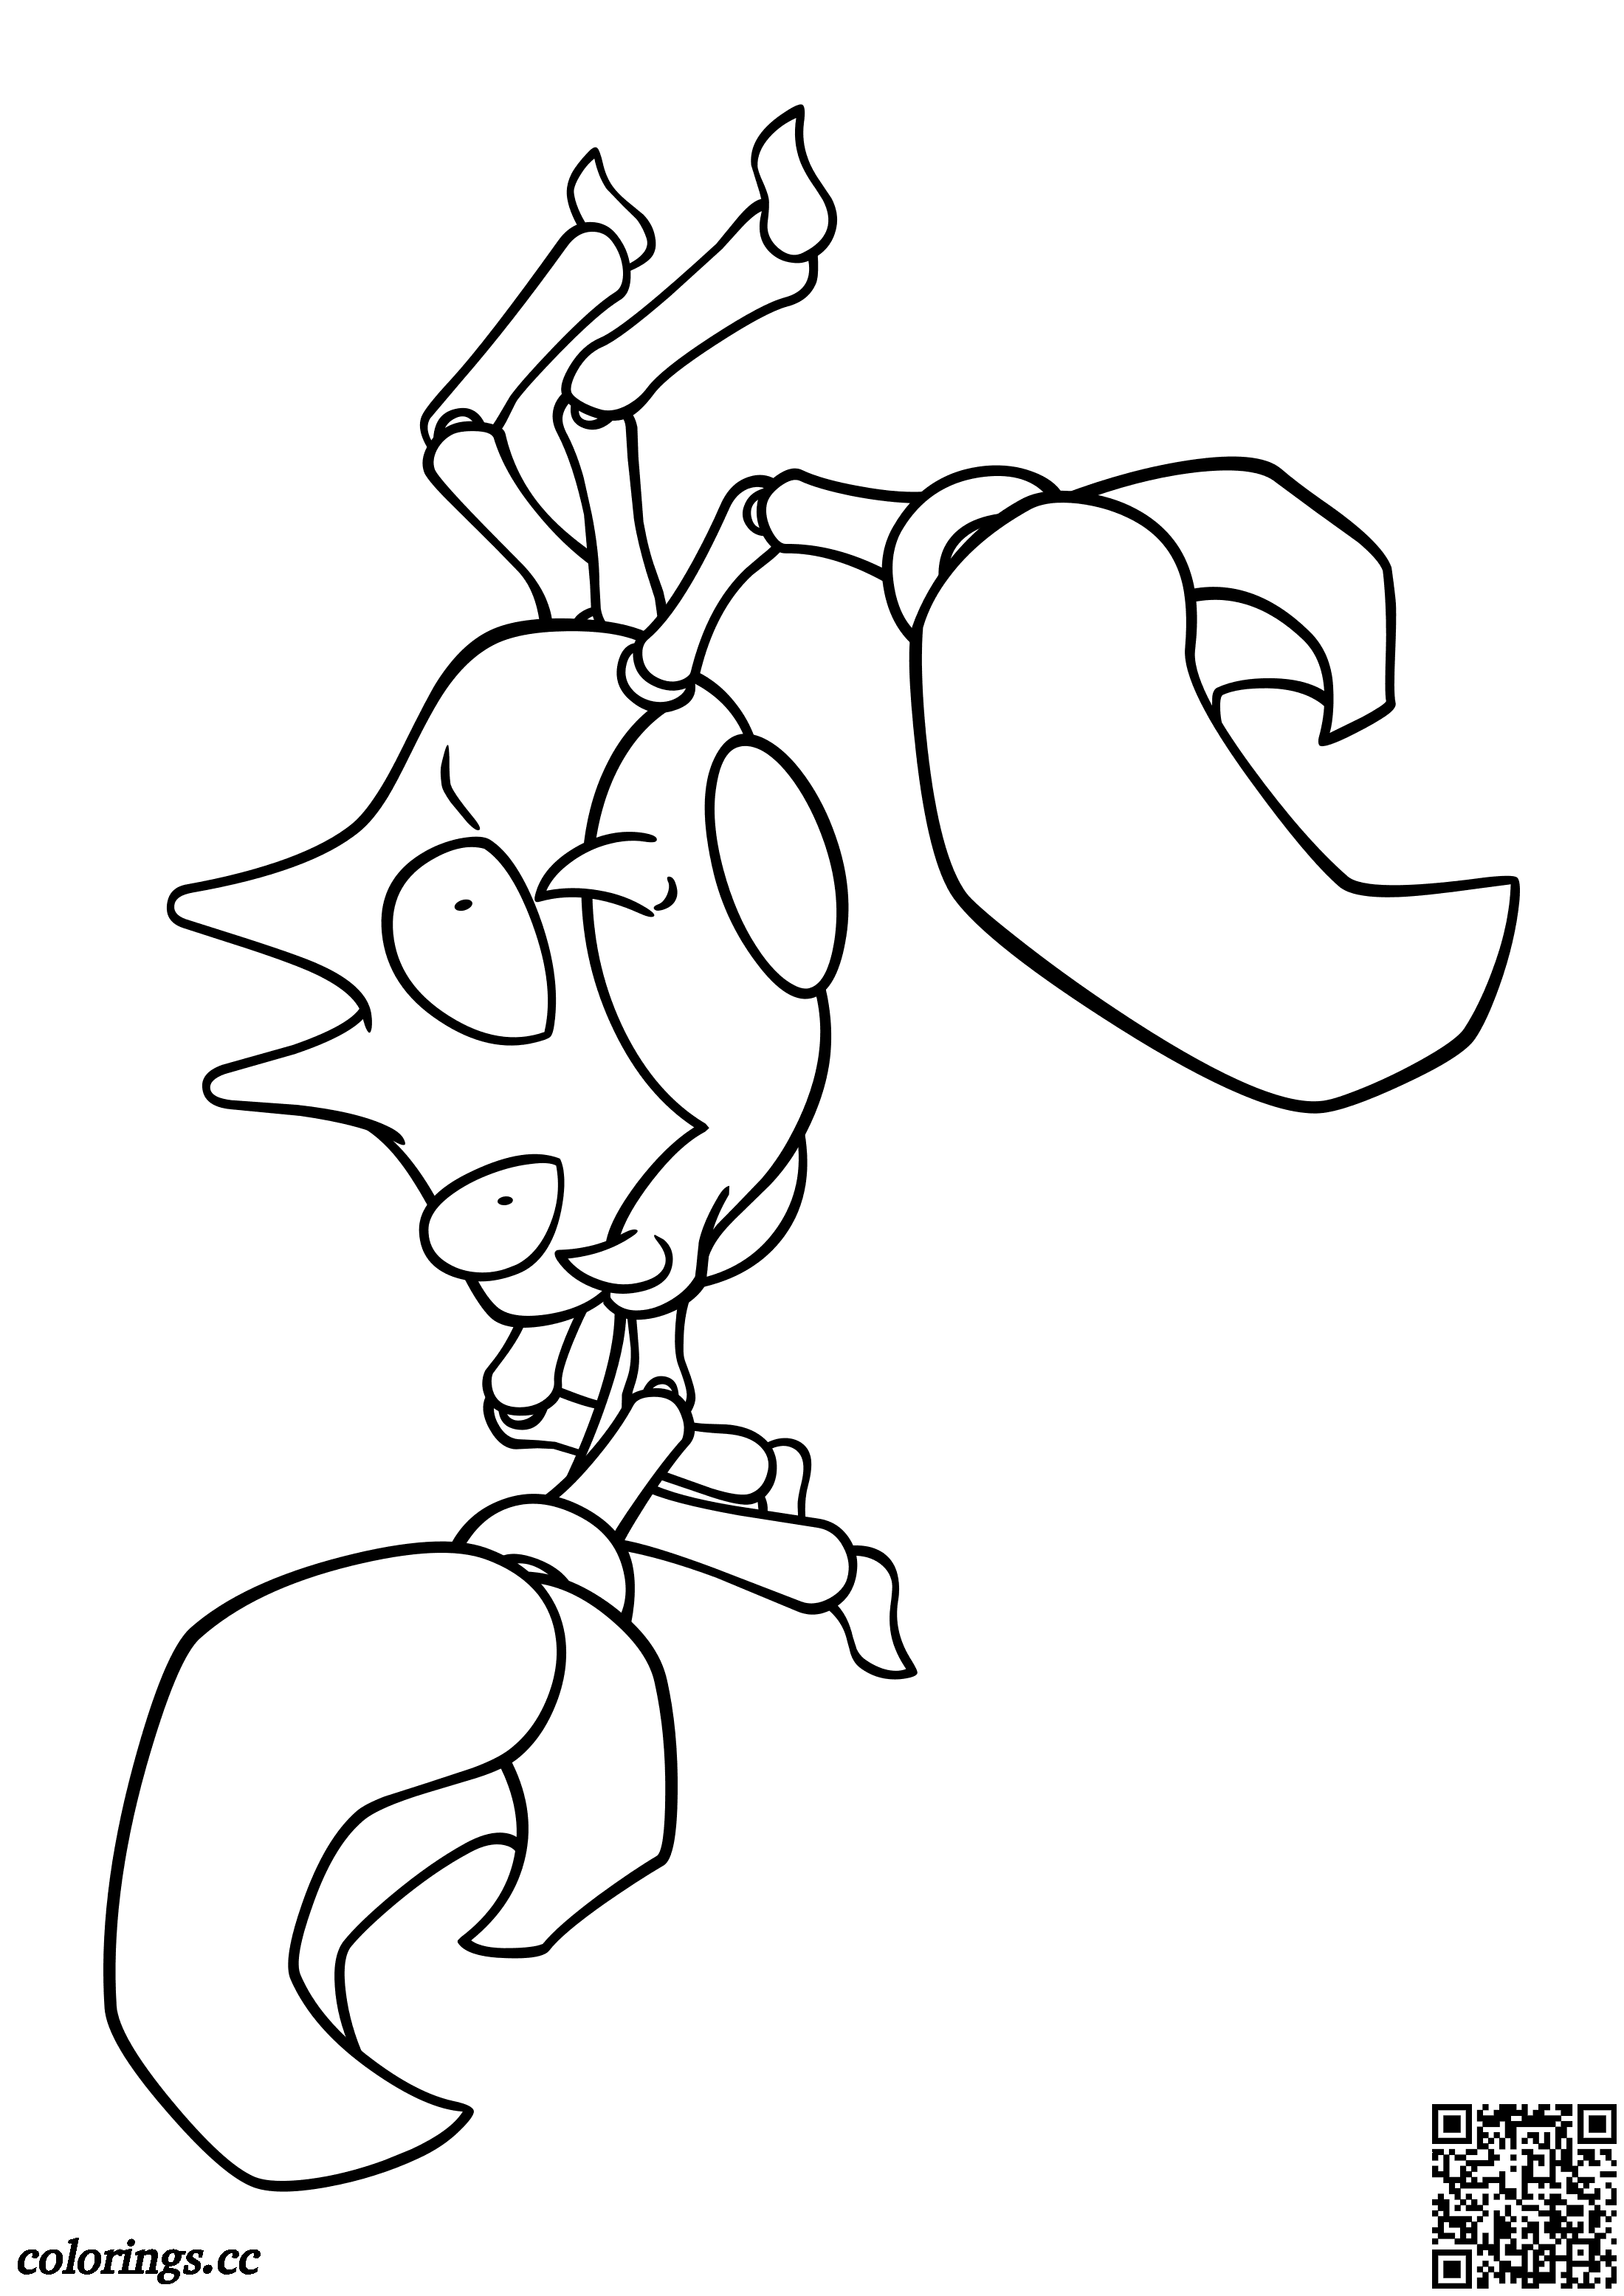 098 - Krabby coloring pages, Pokemon coloring pages - Colorings.cc